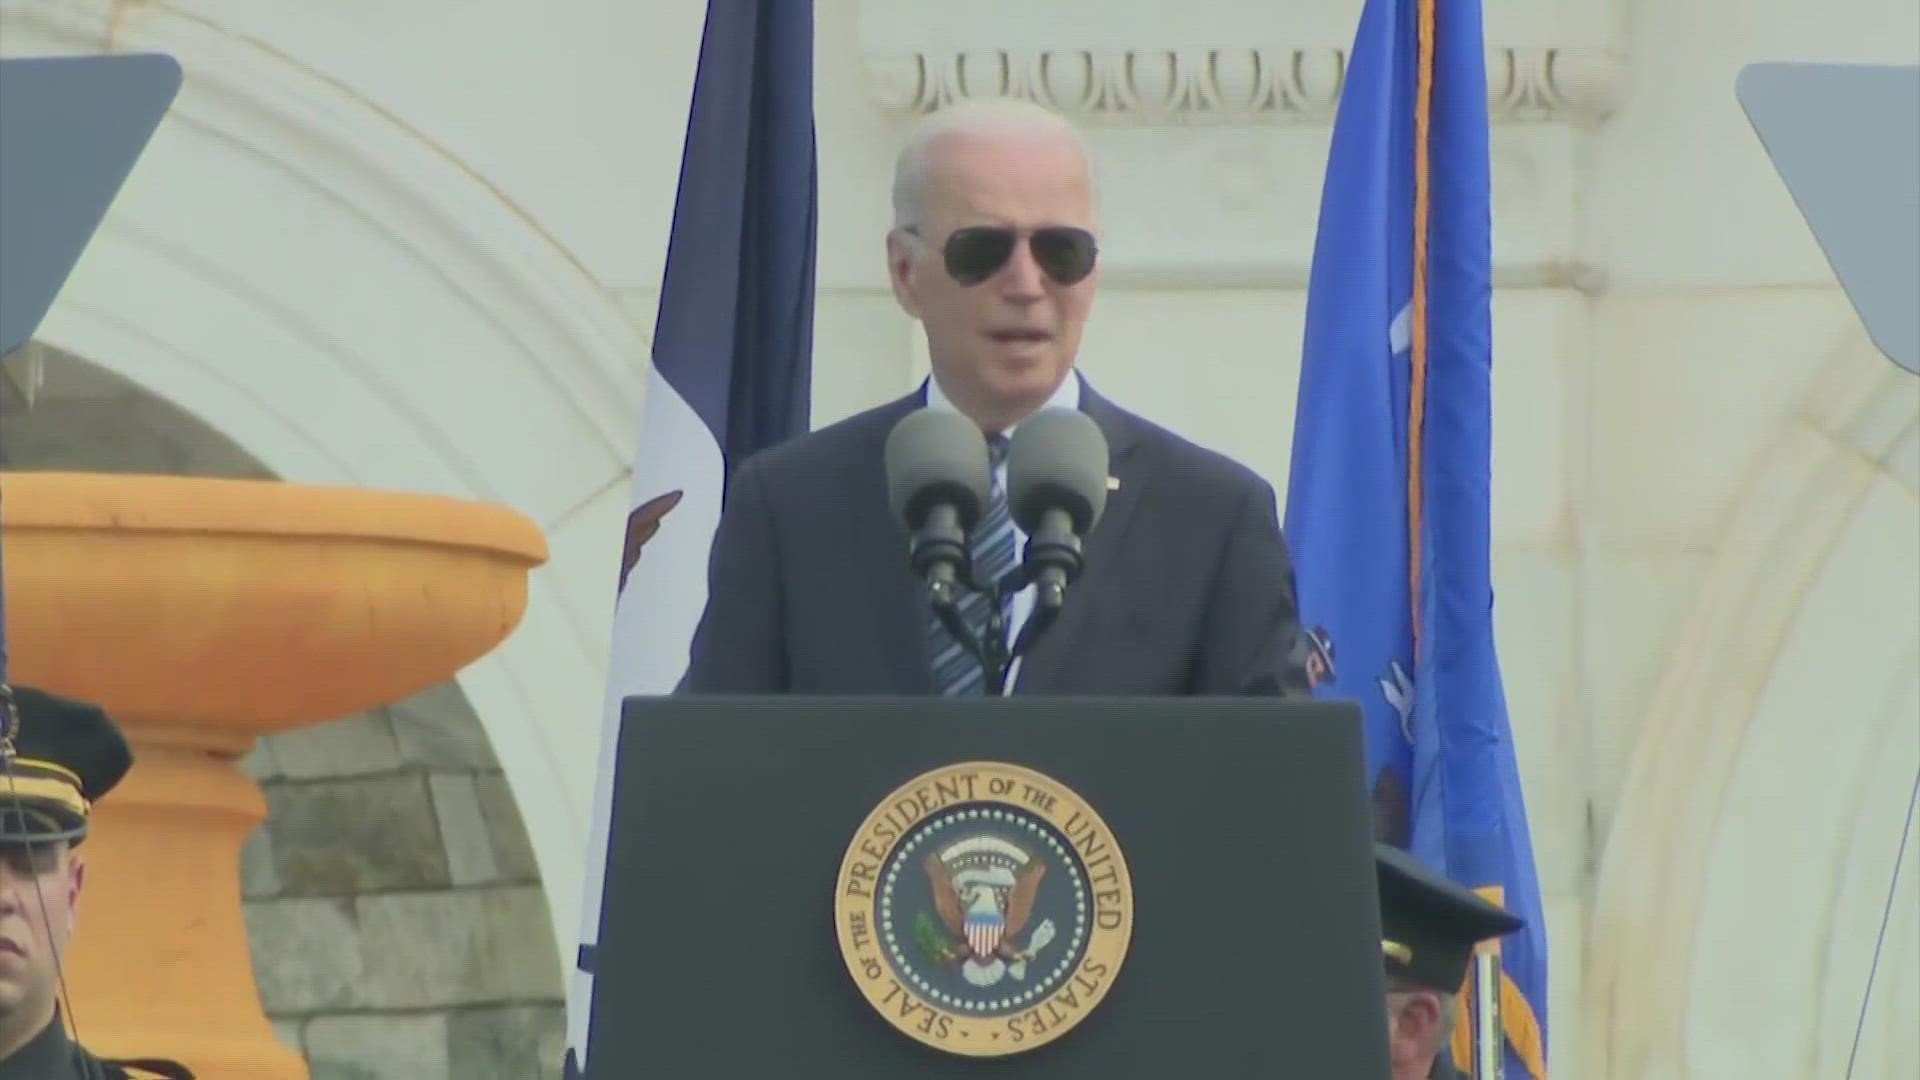 President Biden addressed the three Precinct 4 deputies shot in Houston while speaking at the 40th Annual National Peace Officers’ Memorial Service.